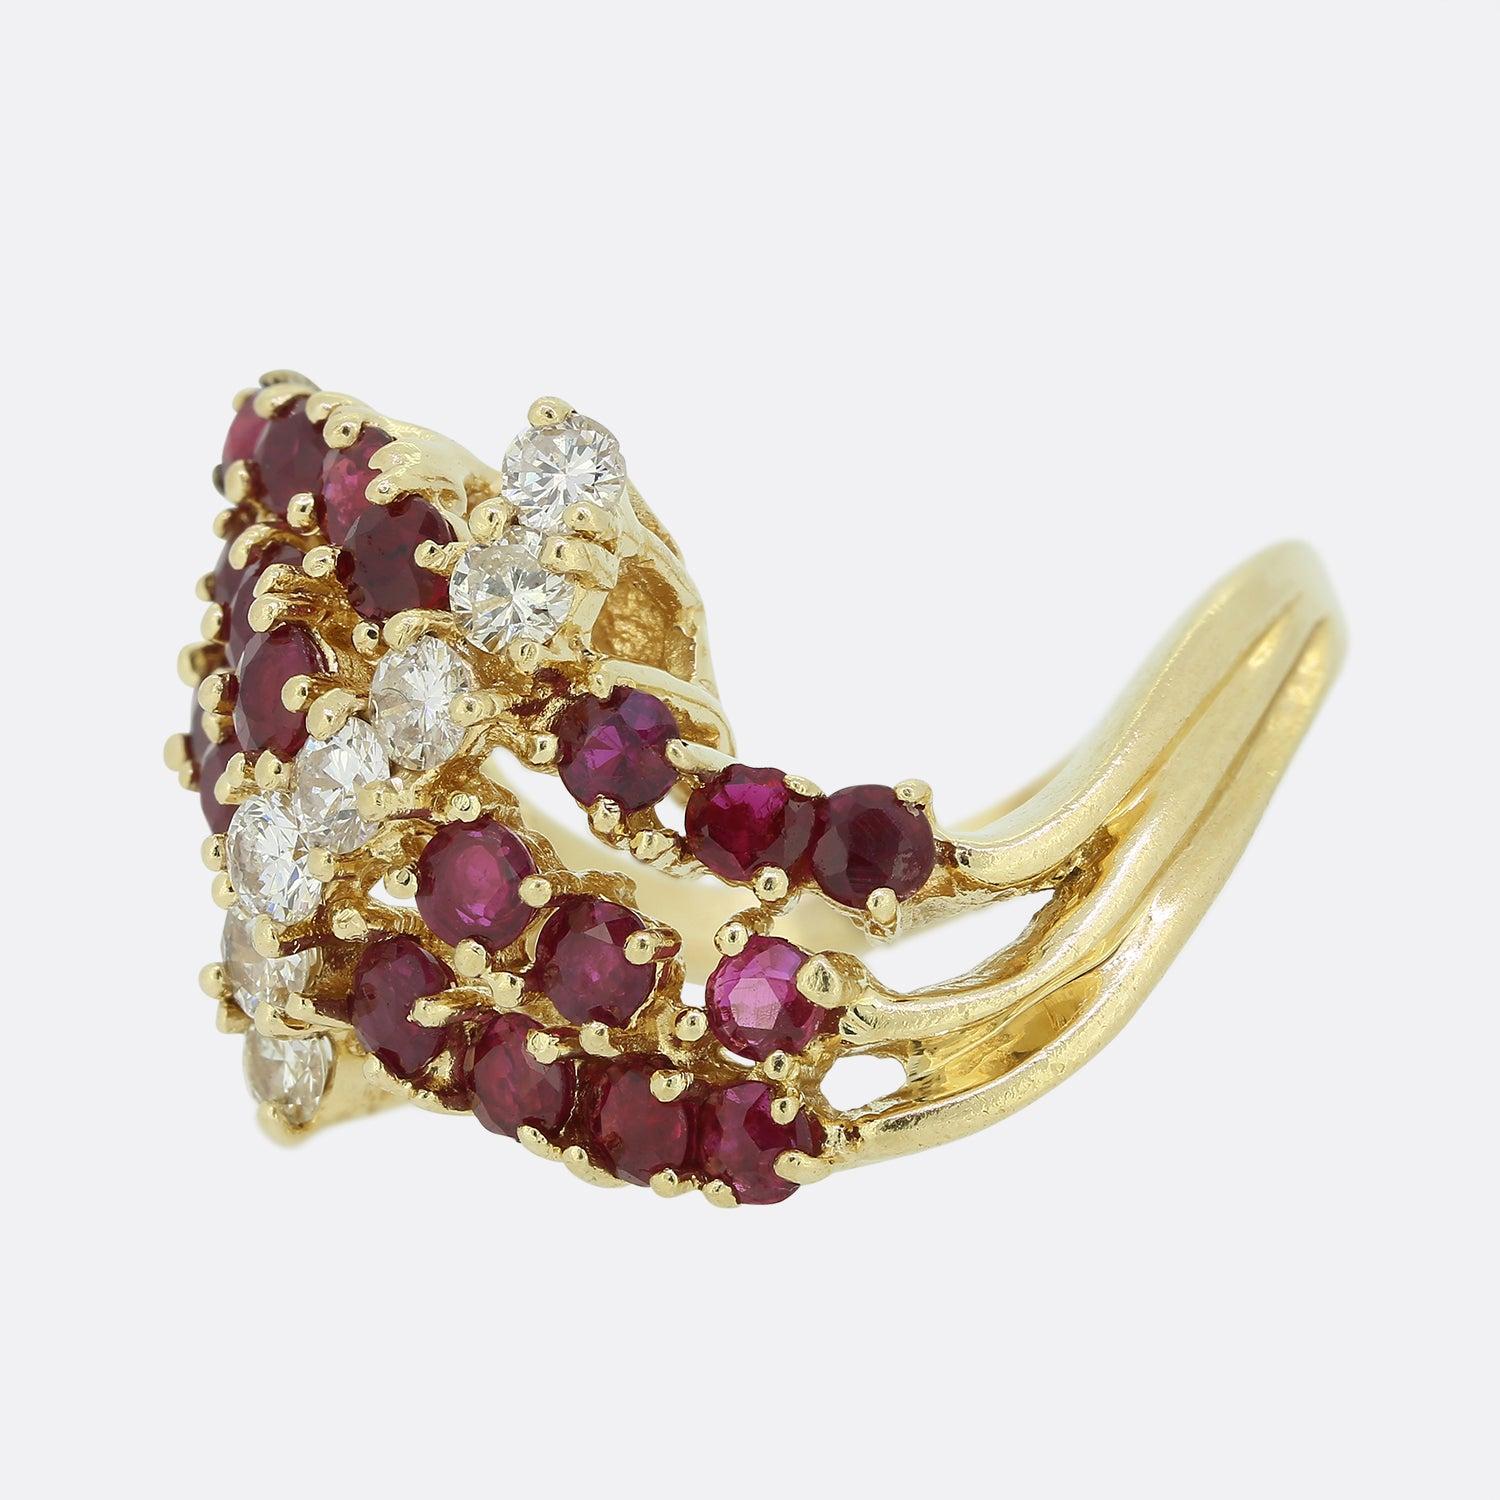 Here we have a 14ct yellow gold ruby and diamond twist ring. The rubies are perfectly matched and a rich red hue, which highly compliments the bright white sparkle of the central round brilliant cut diamonds.

Condition: Used (Very Good)
Weight: 7.2